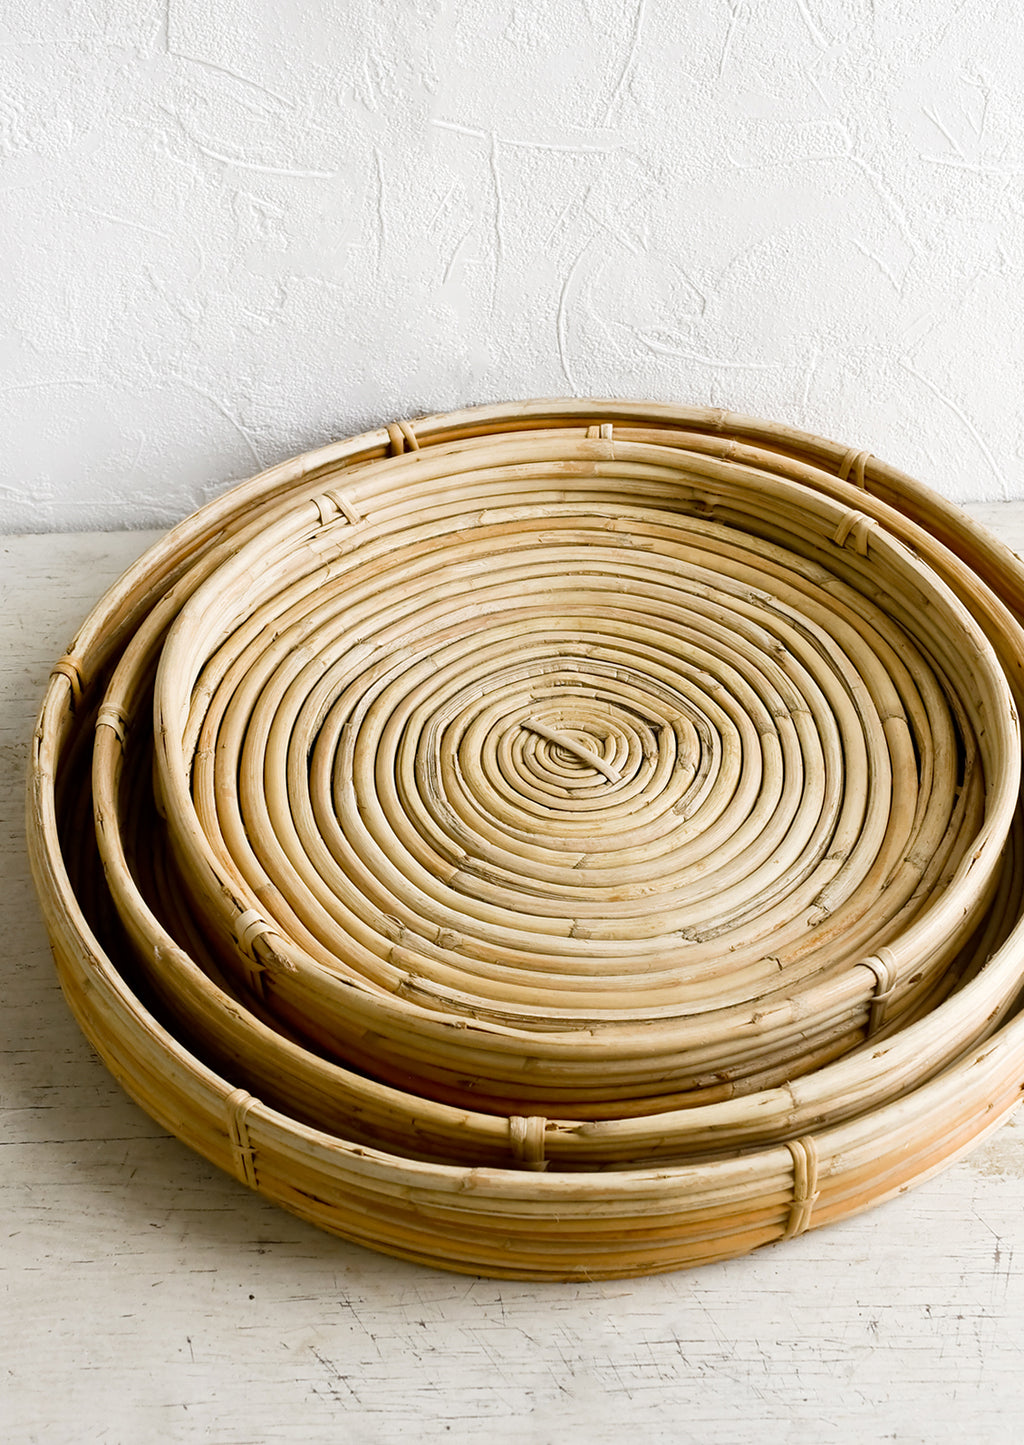 4: Shallow woven rattan trays in three incremental sizes.